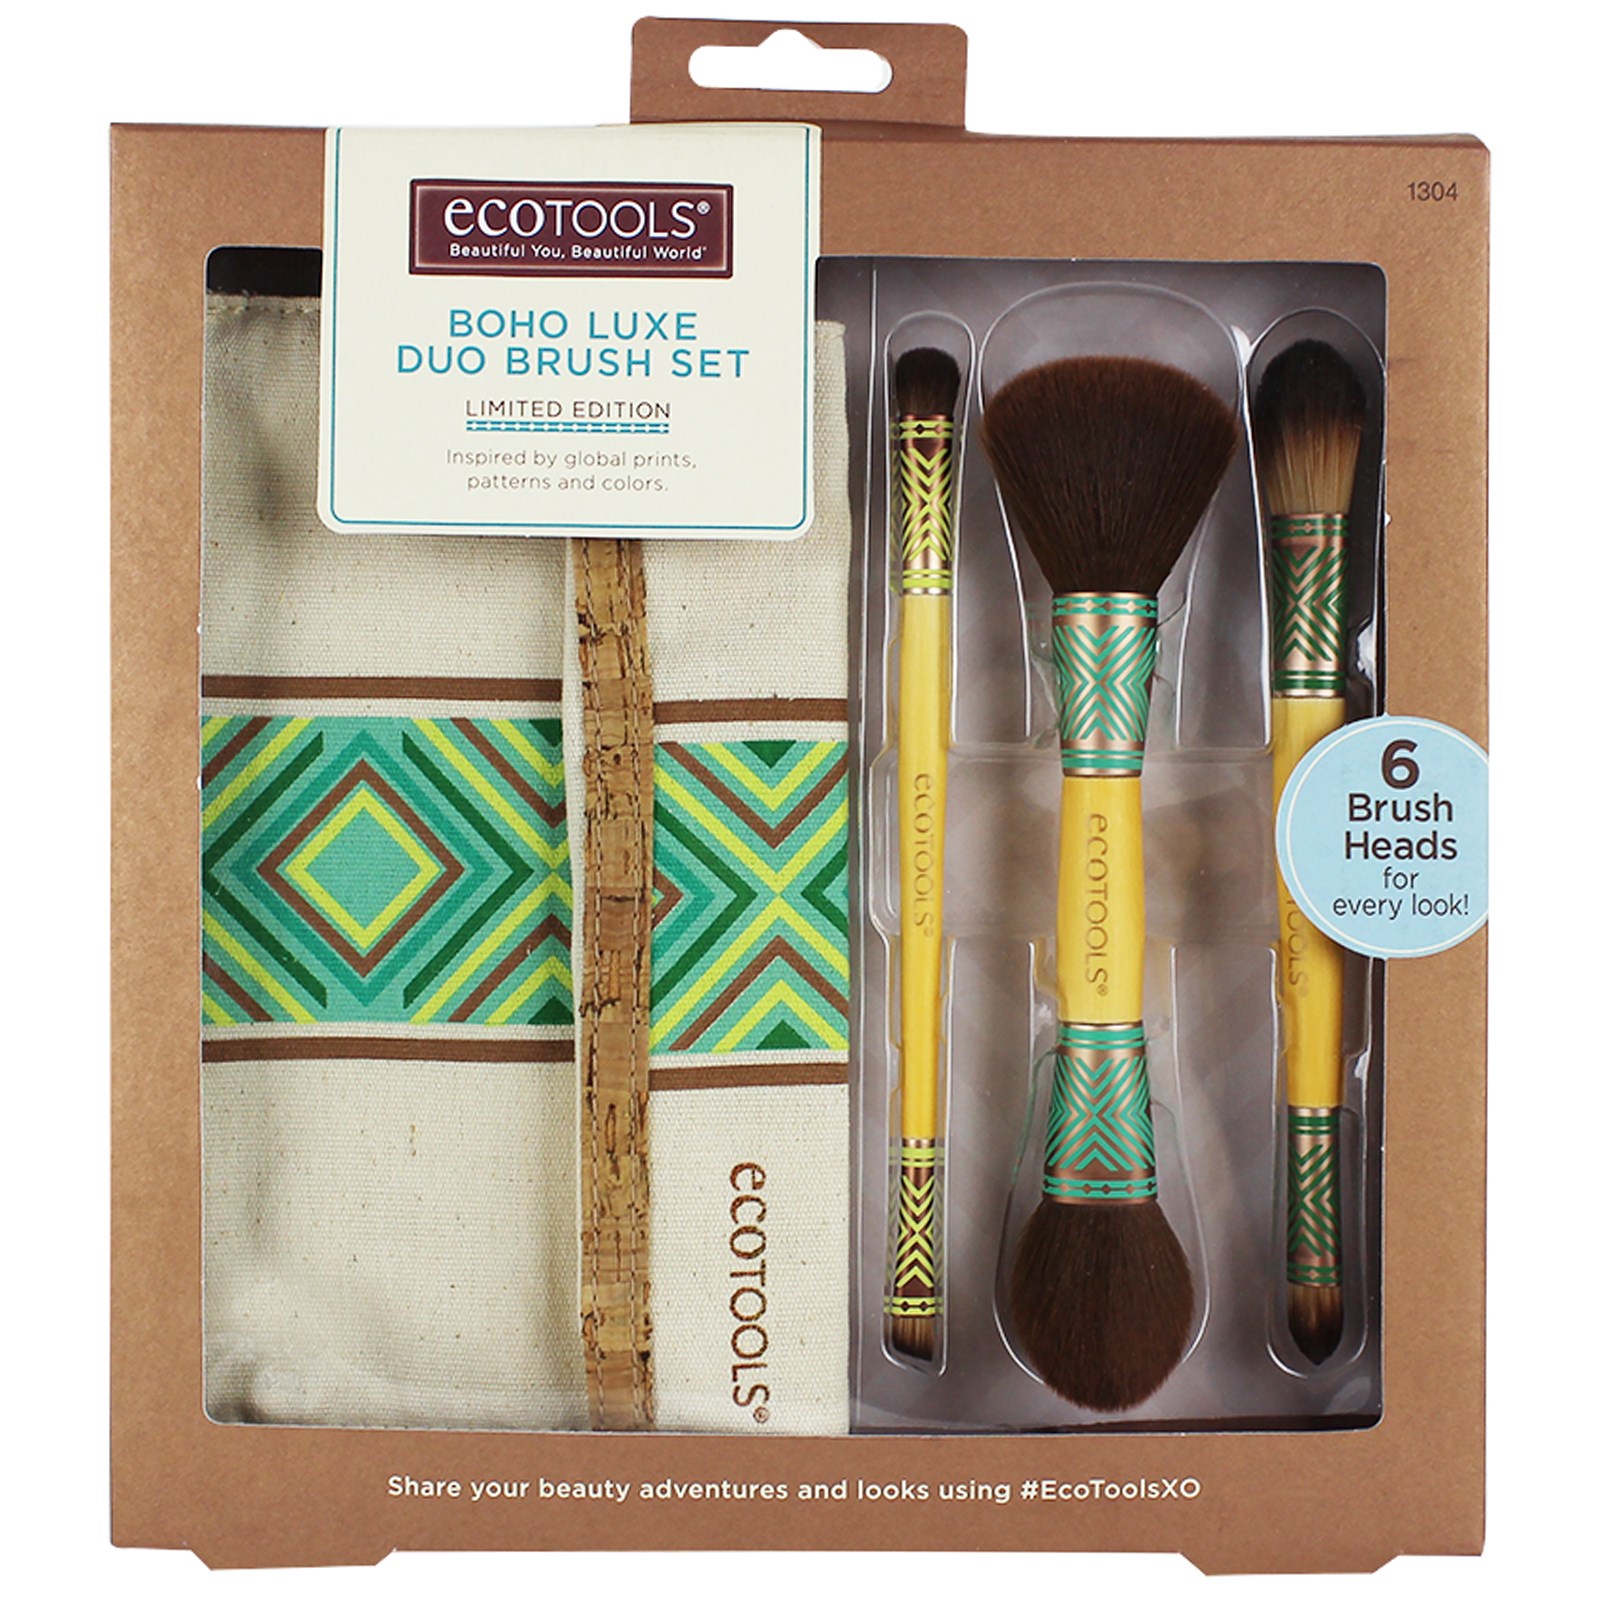 boho-luxe-duo-brush-set_packaged